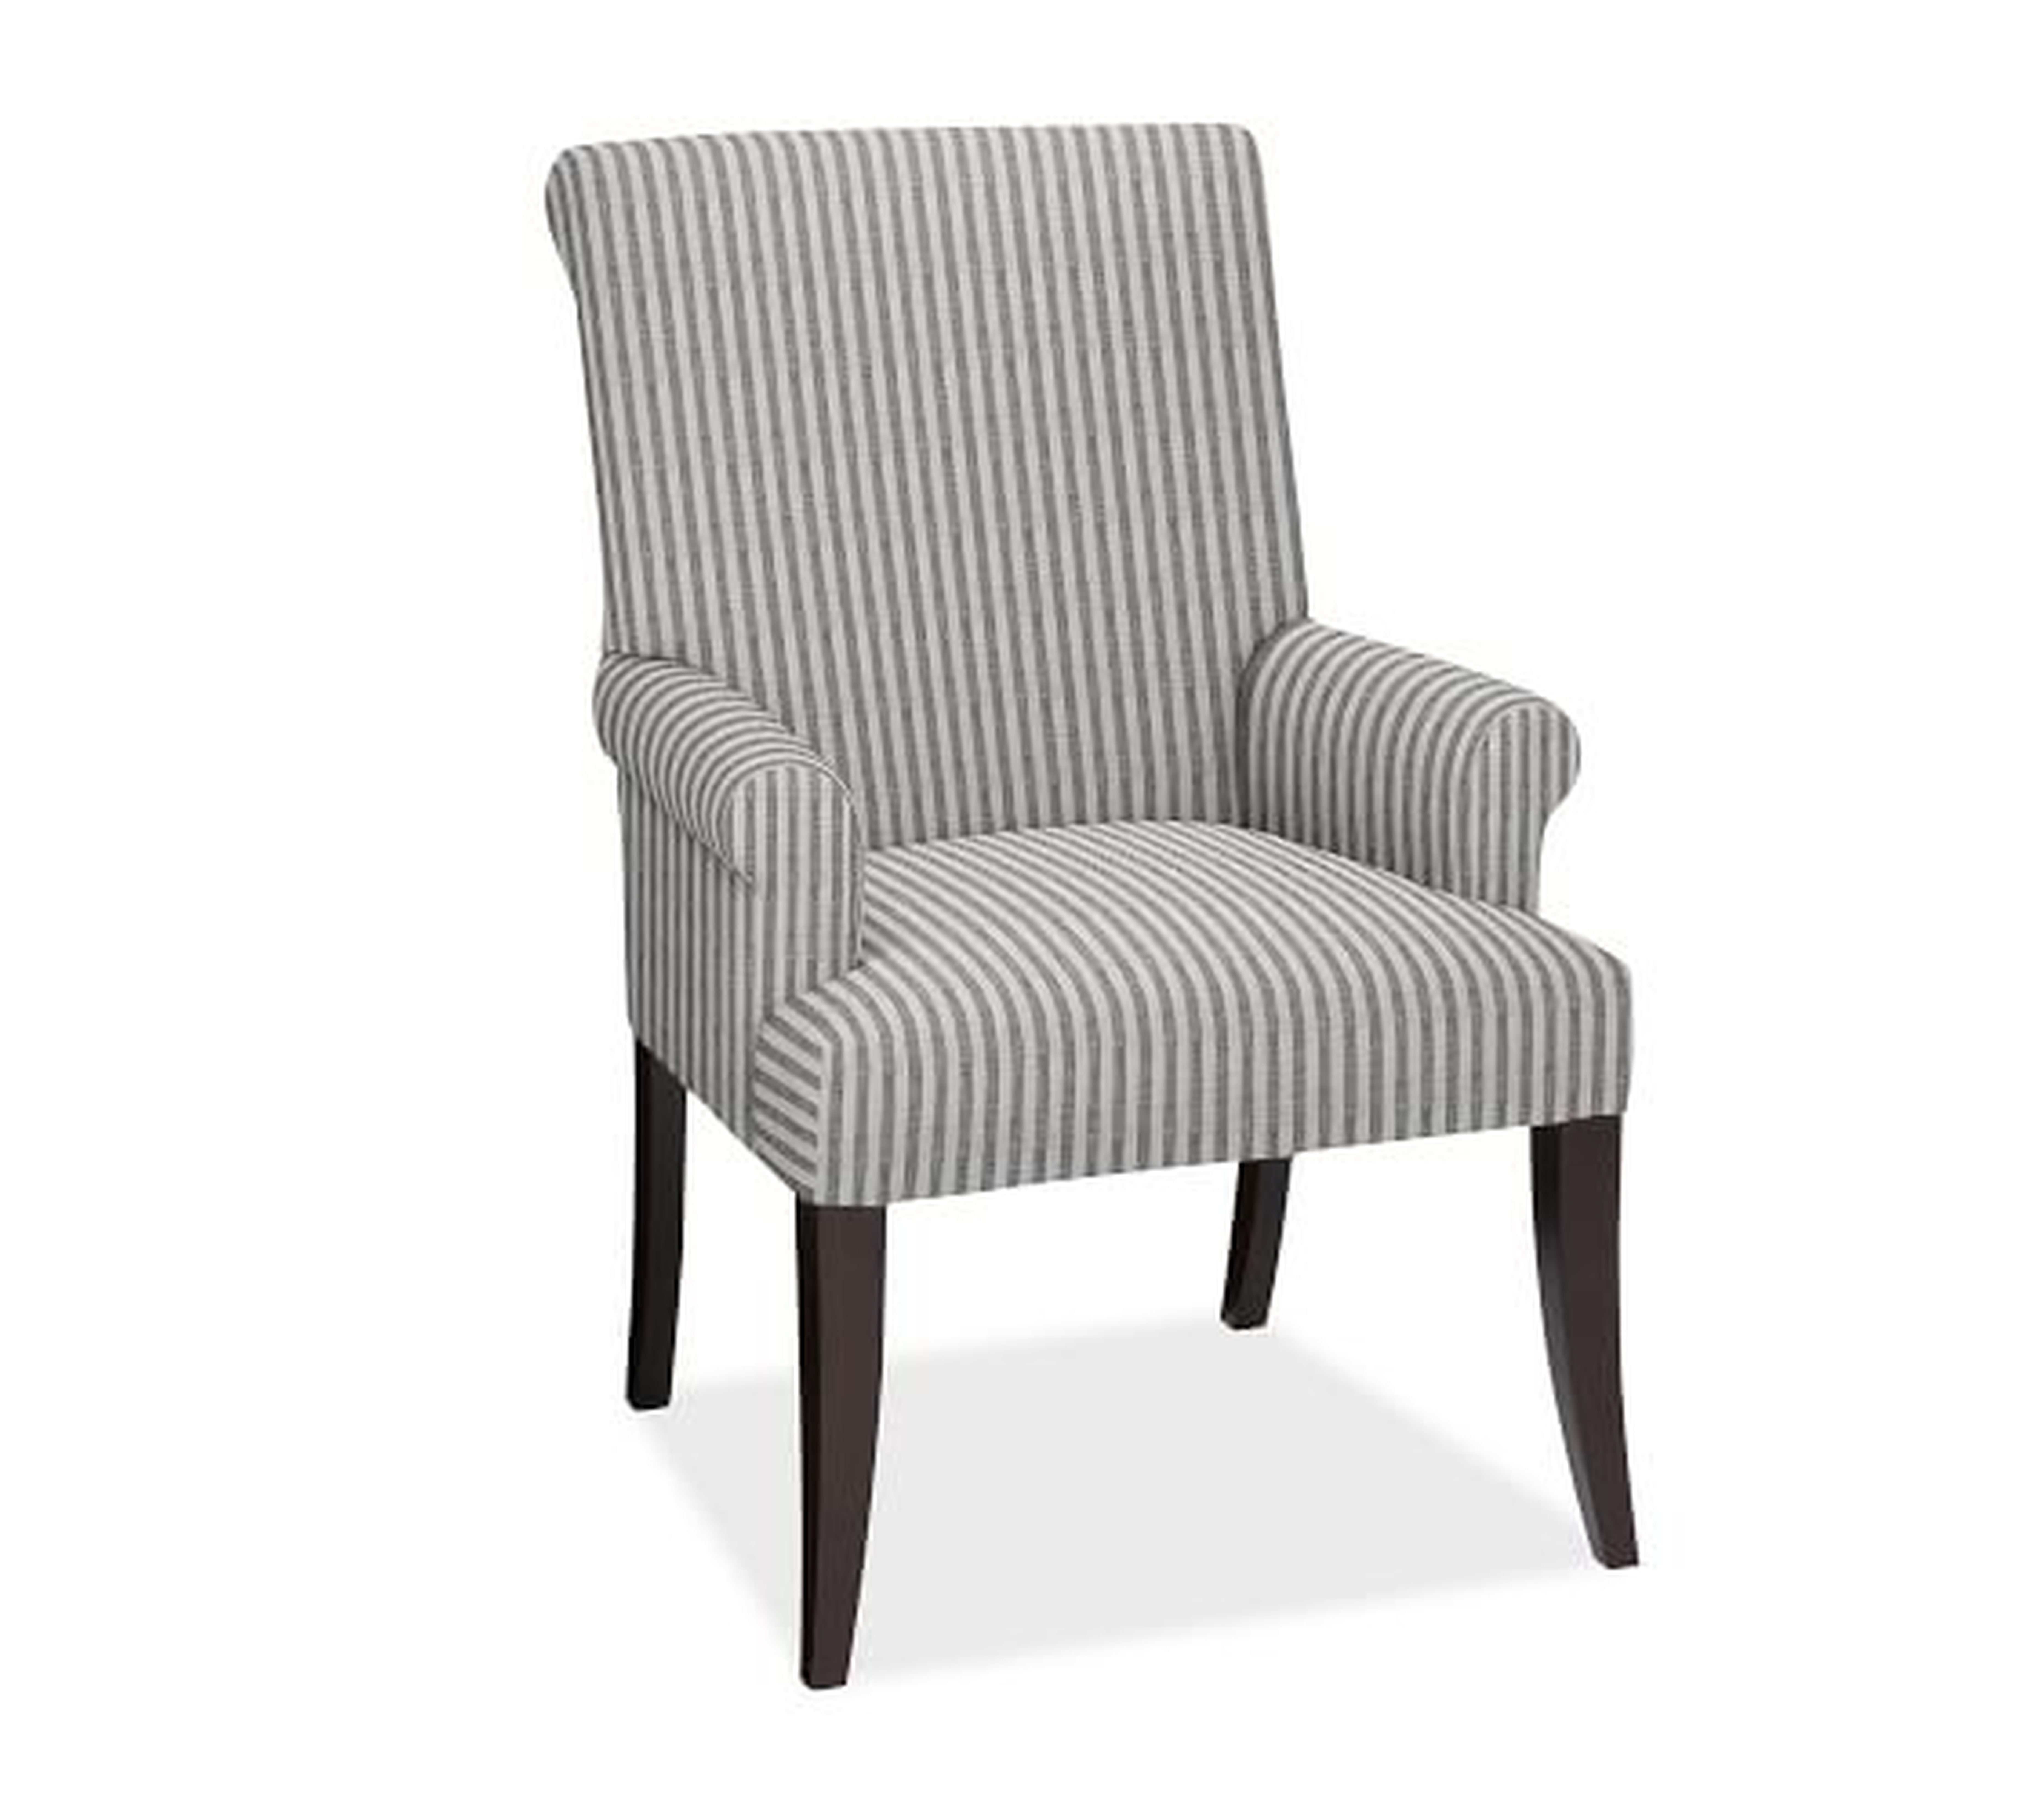 PB Comfort Roll Upholstered Dining Arm Chair, Vintage Stripe Black/Ivory - Pottery Barn